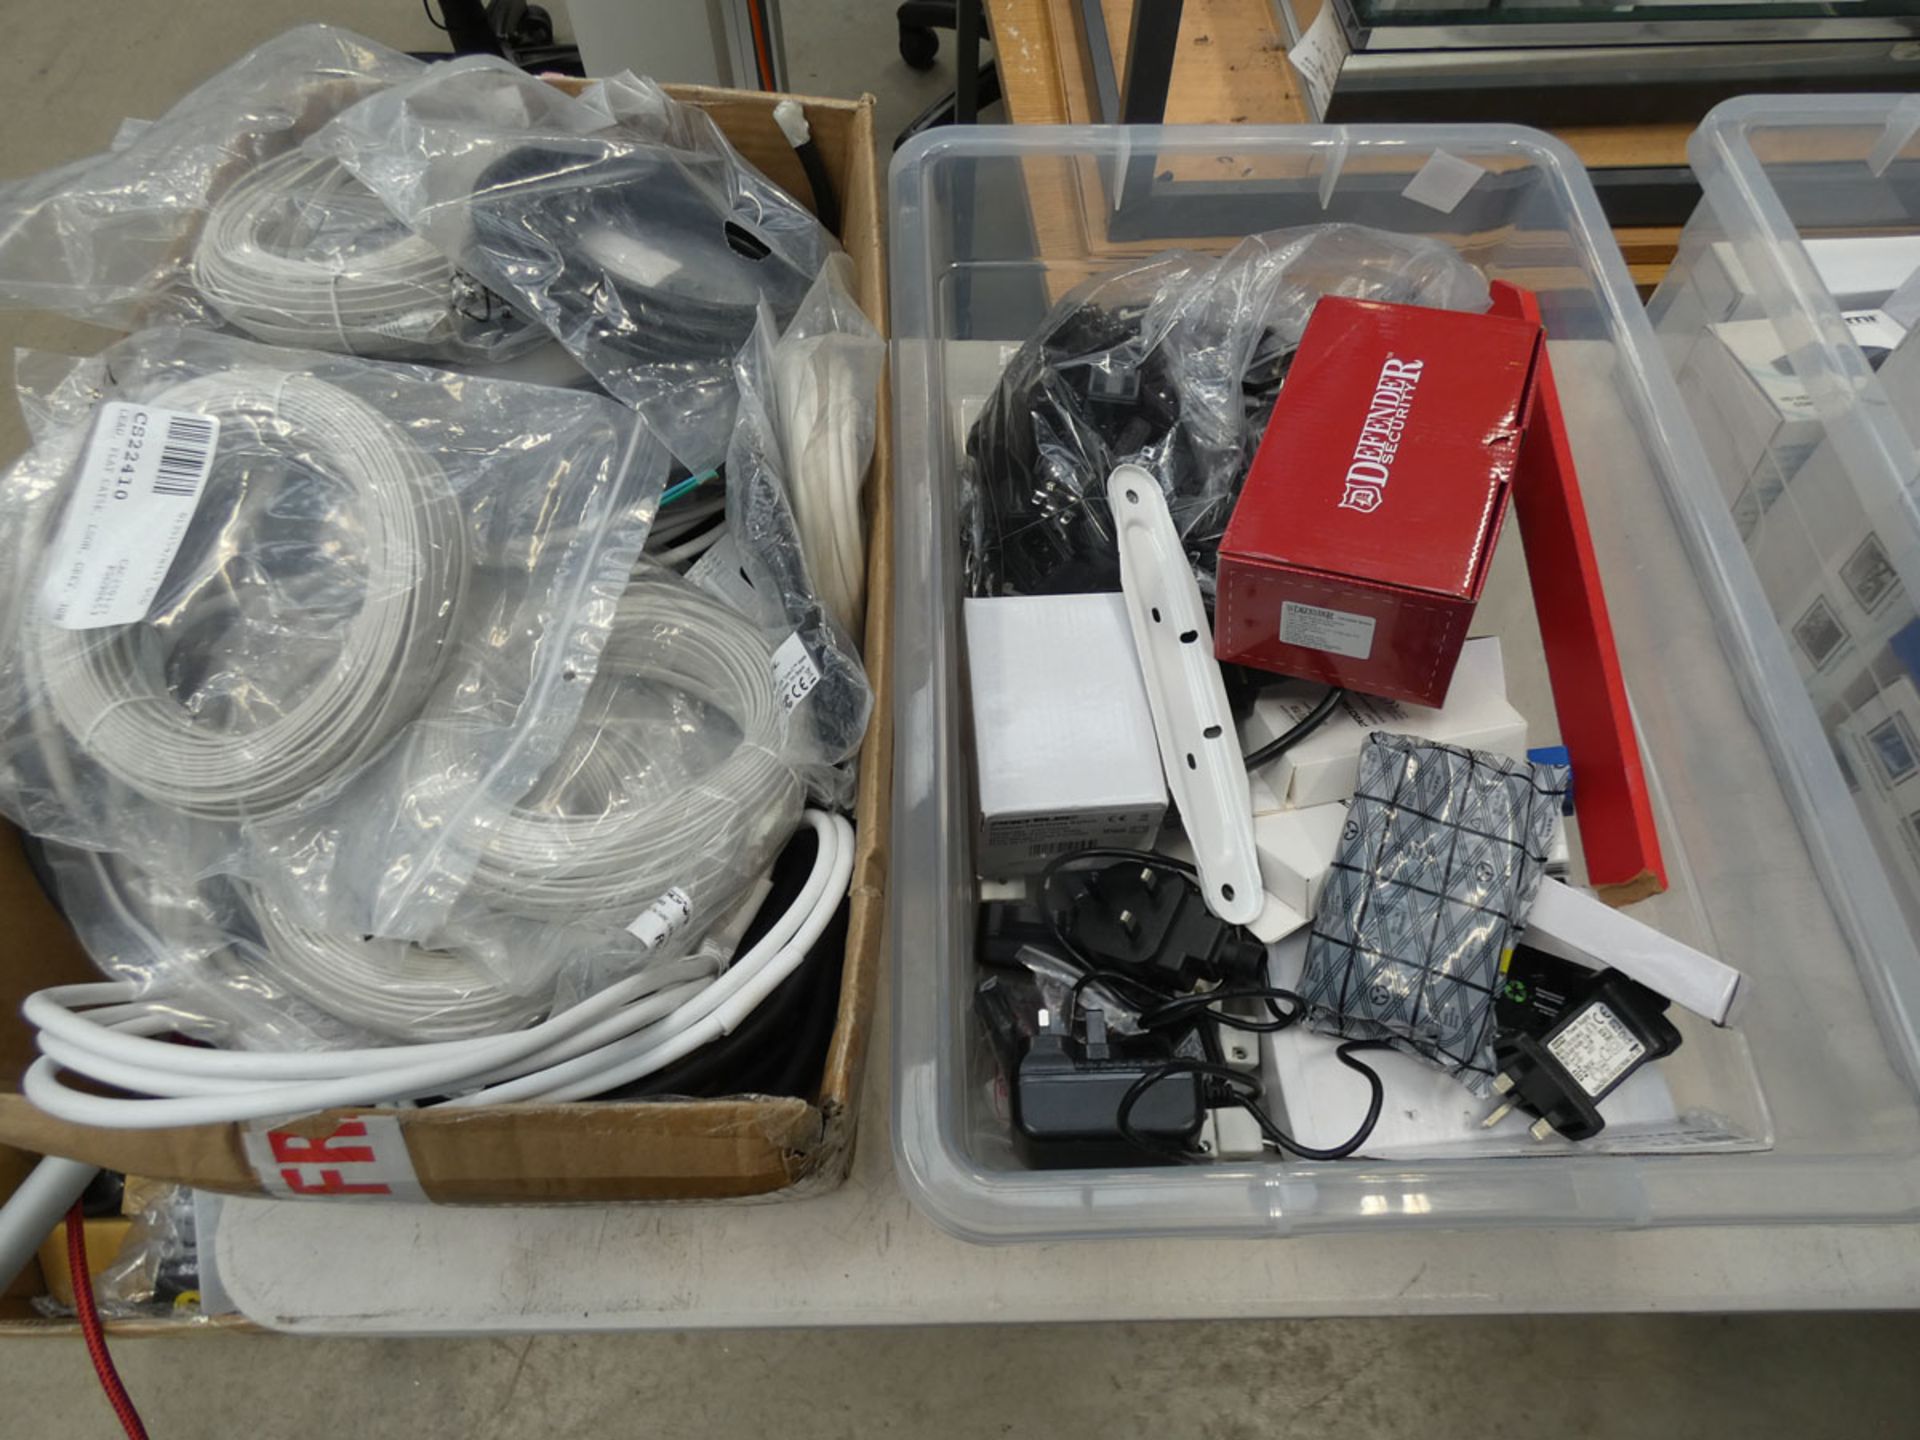 Box of power supplies, box of flat cables, angle cables, and Bullet security camera